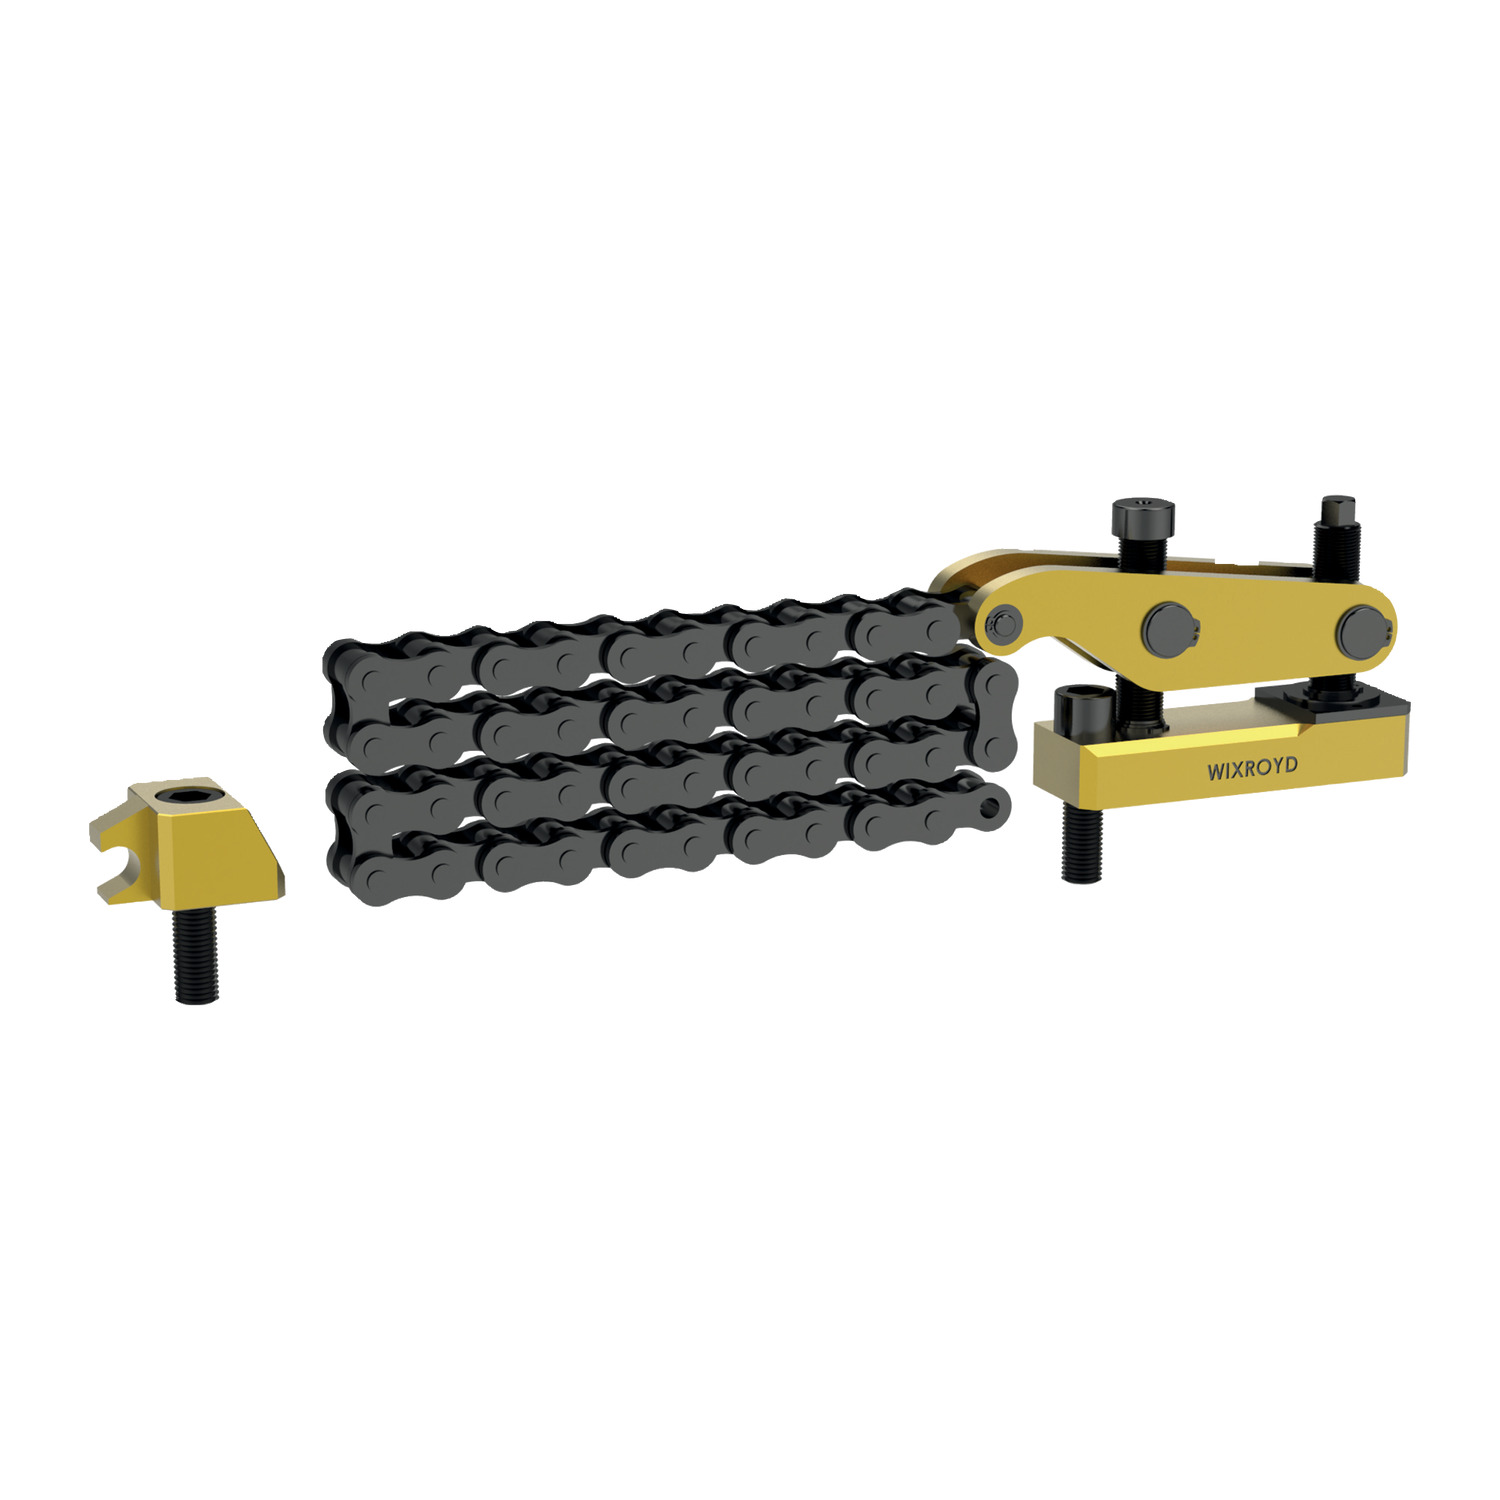 Product 12752, Chain Clamp Sets - 50kN for large diameter clamping / 